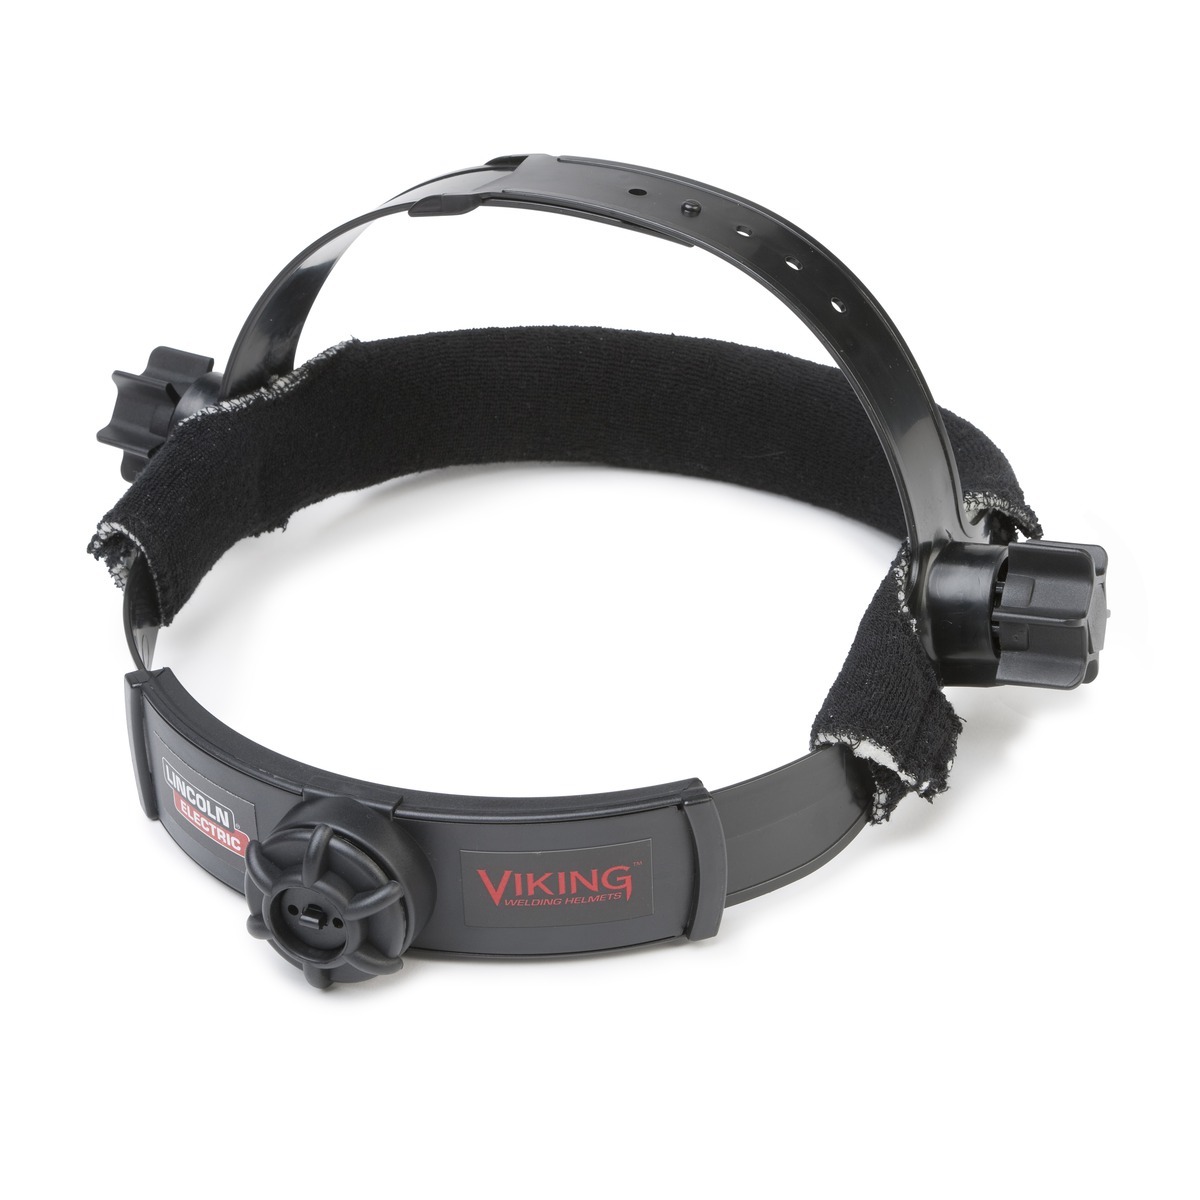 Lincoln Electric® Replacement Headgear With Sweatband For Use With VIKING™, 700G And 750S Series Welding Helmet